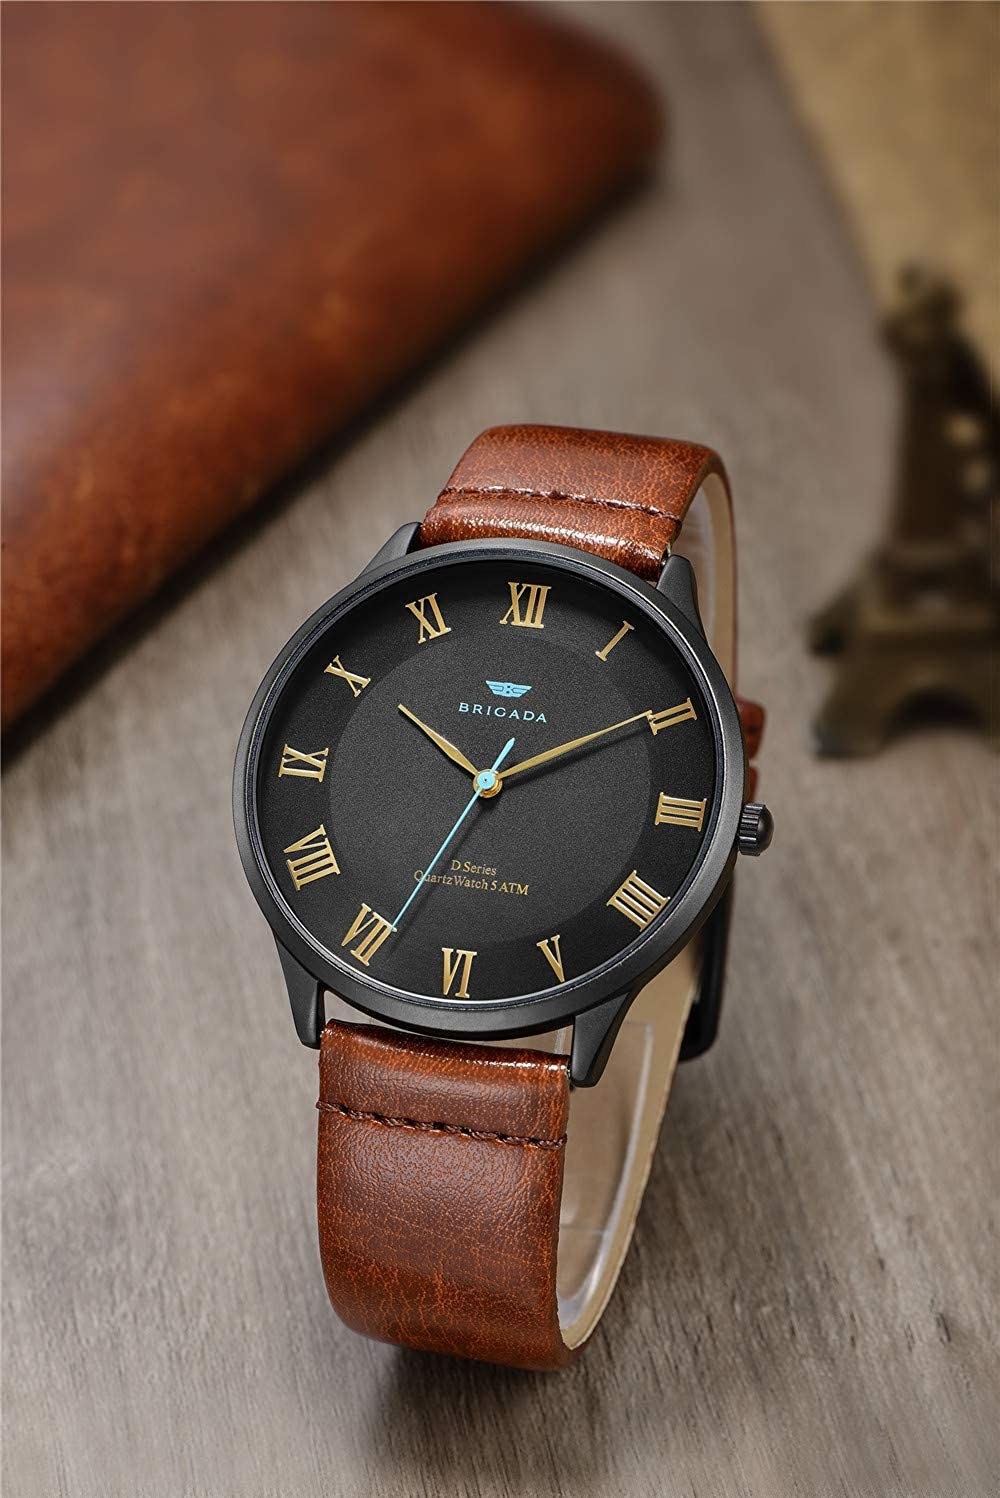 The watch with brown faux-leather band